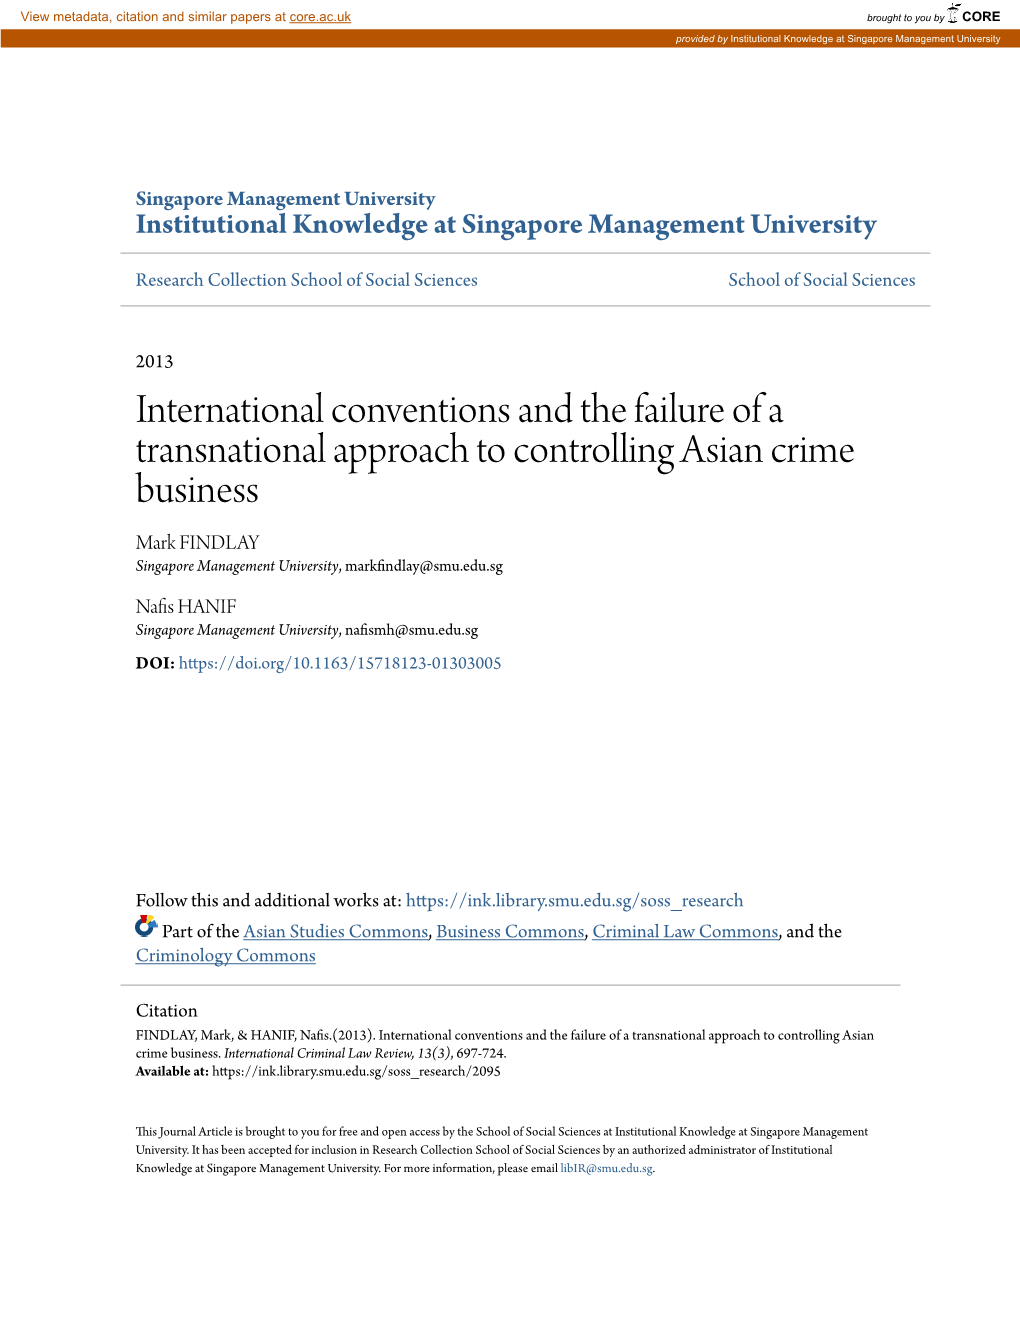 International Conventions and the Failure of a Transnational Approach